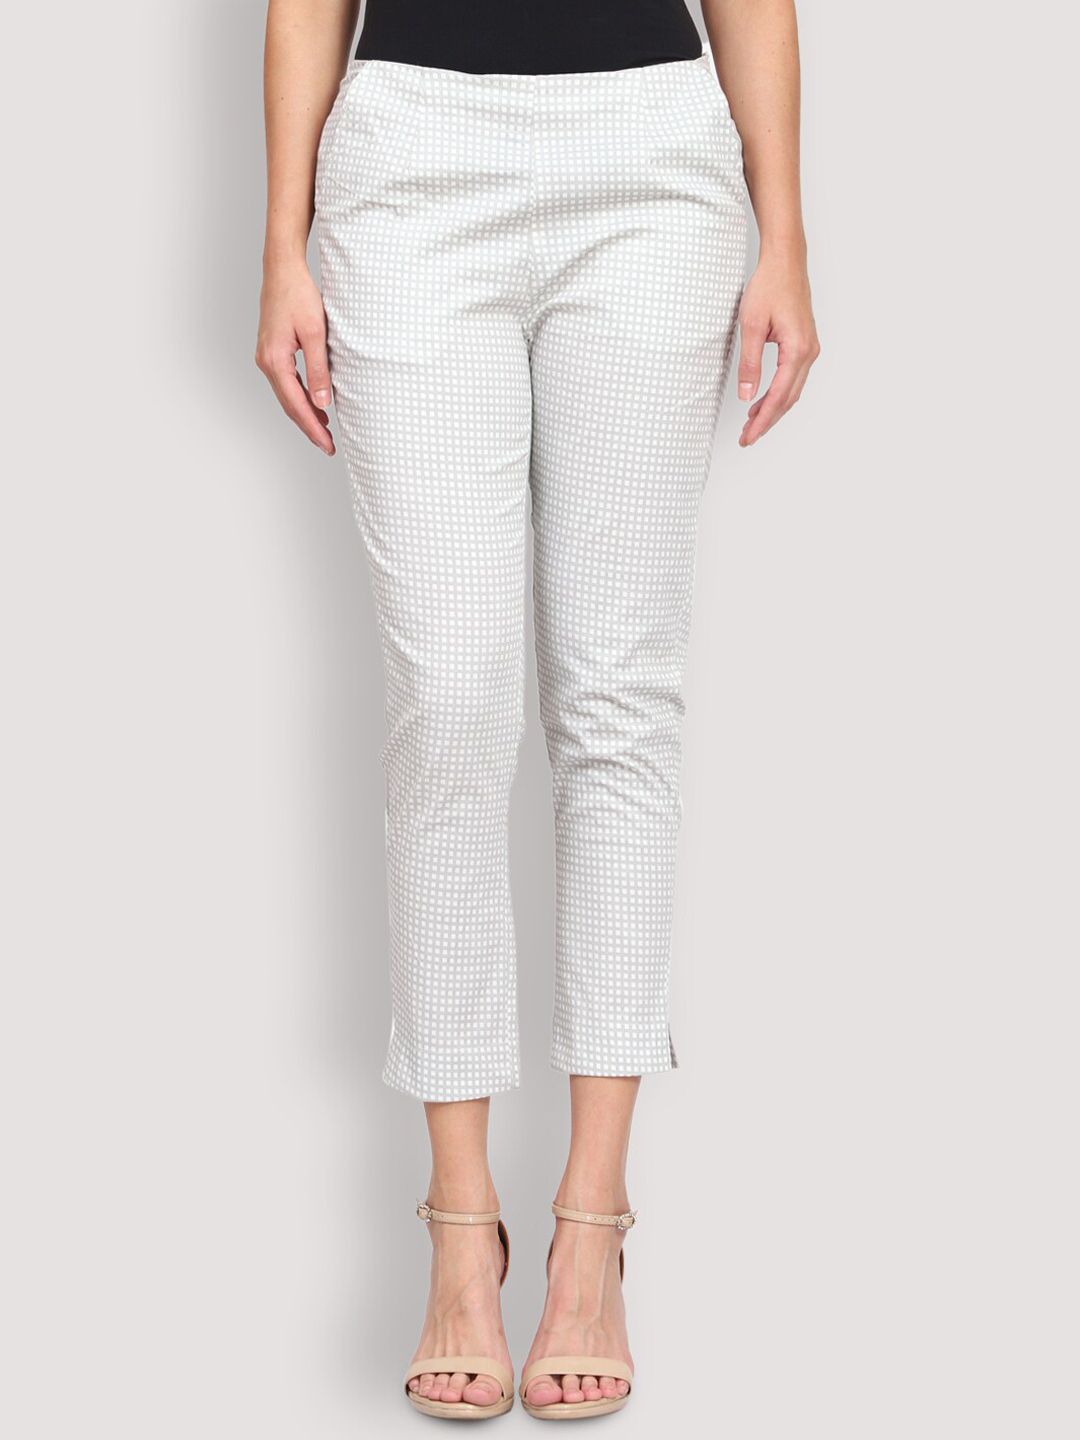 SHEREEN Women Grey Checked Smart Slim Fit Trousers Price in India